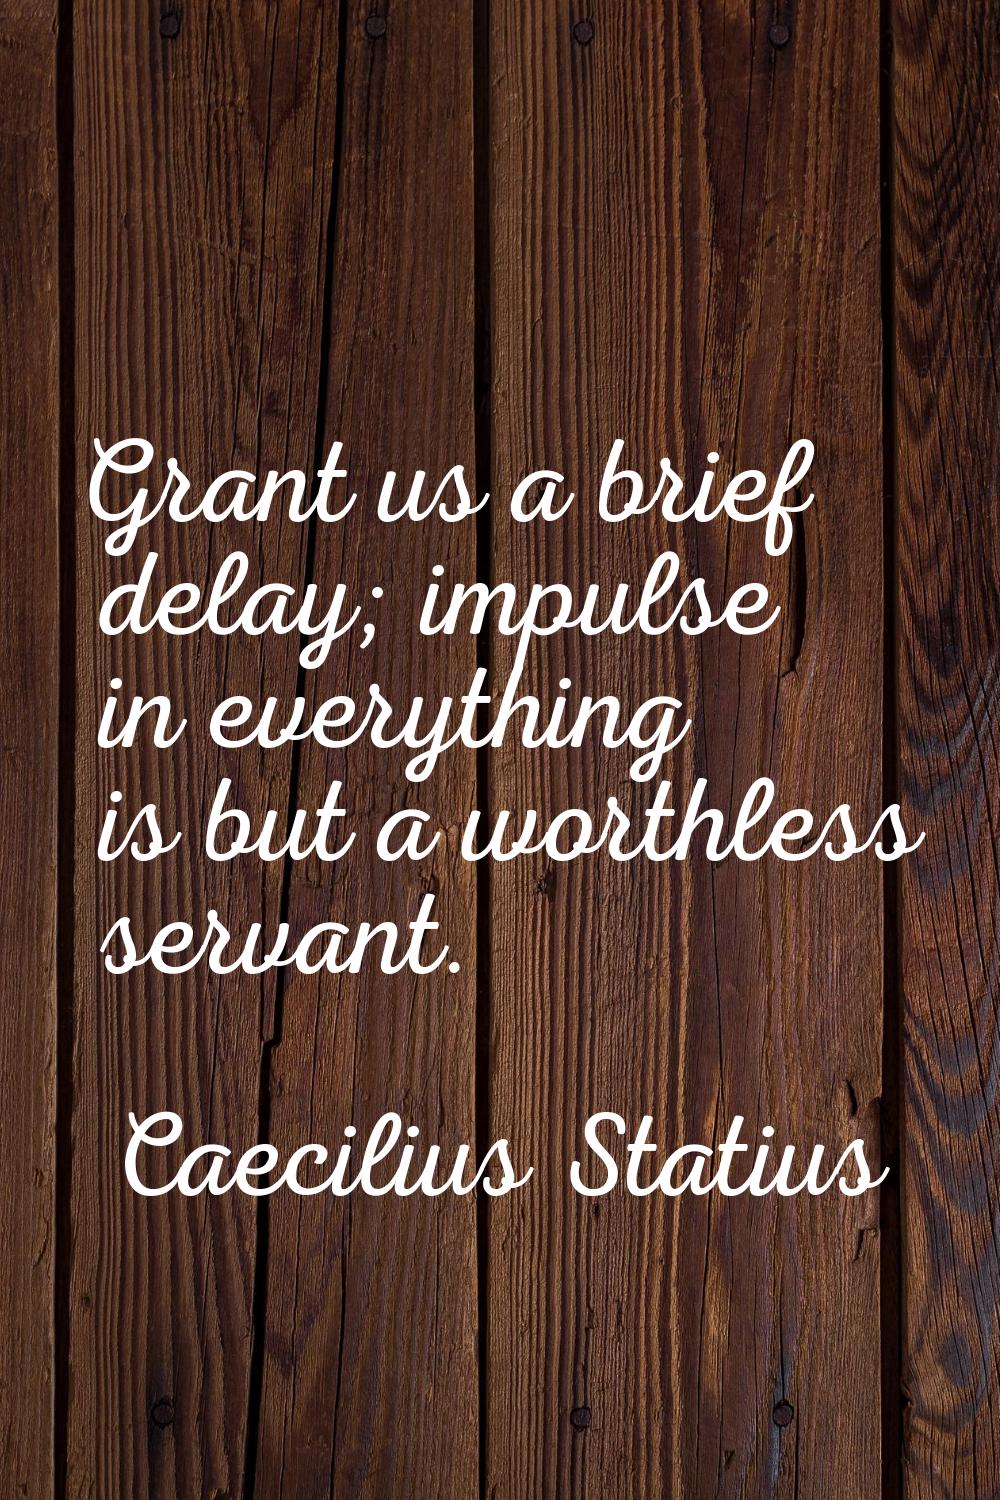 Grant us a brief delay; impulse in everything is but a worthless servant.